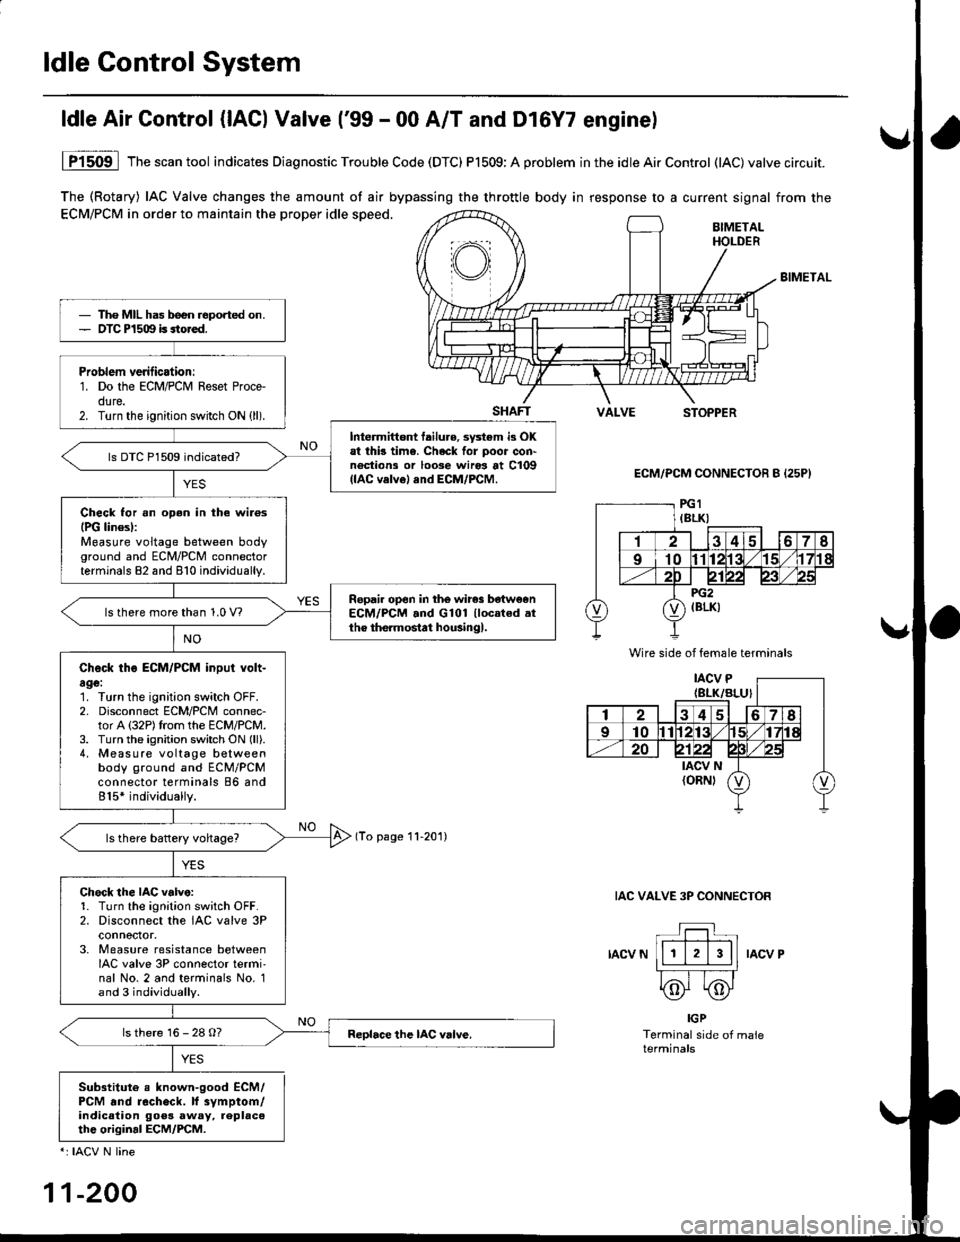 HONDA CIVIC 1997 6.G Workshop Manual ldle Gontrol System
The (Rotary) IAC Valve changes the amount of air bypassing the throttle body in response to a current signal from the
ECM/PCM in order to maintain the proper idle speed.BIMETALHOLD